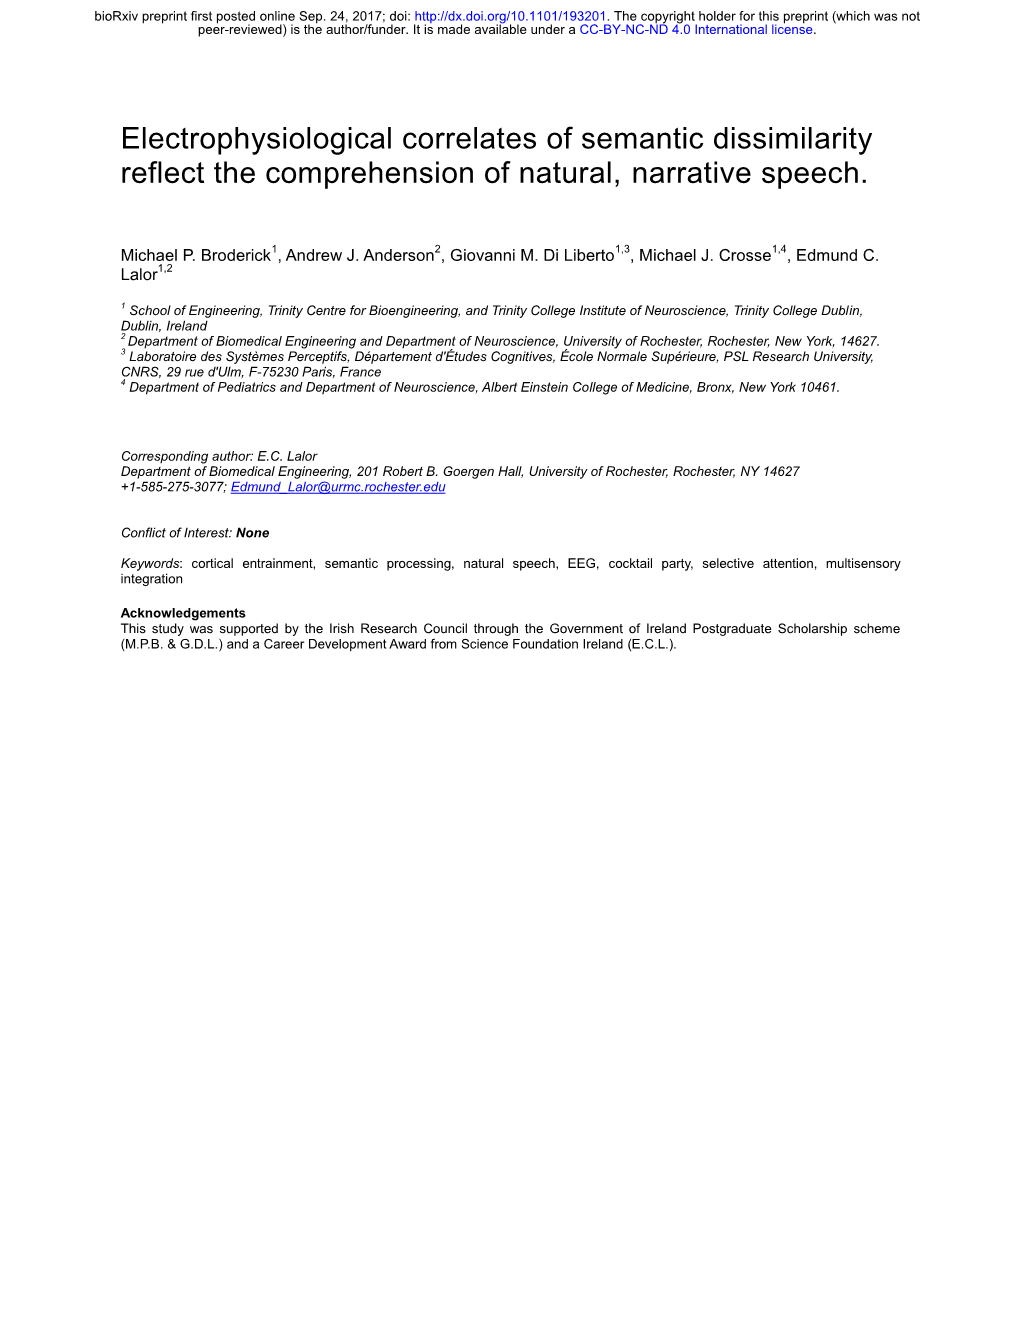 Electrophysiological Correlates of Semantic Dissimilarity Reflect the Comprehension of Natural, Narrative Speech